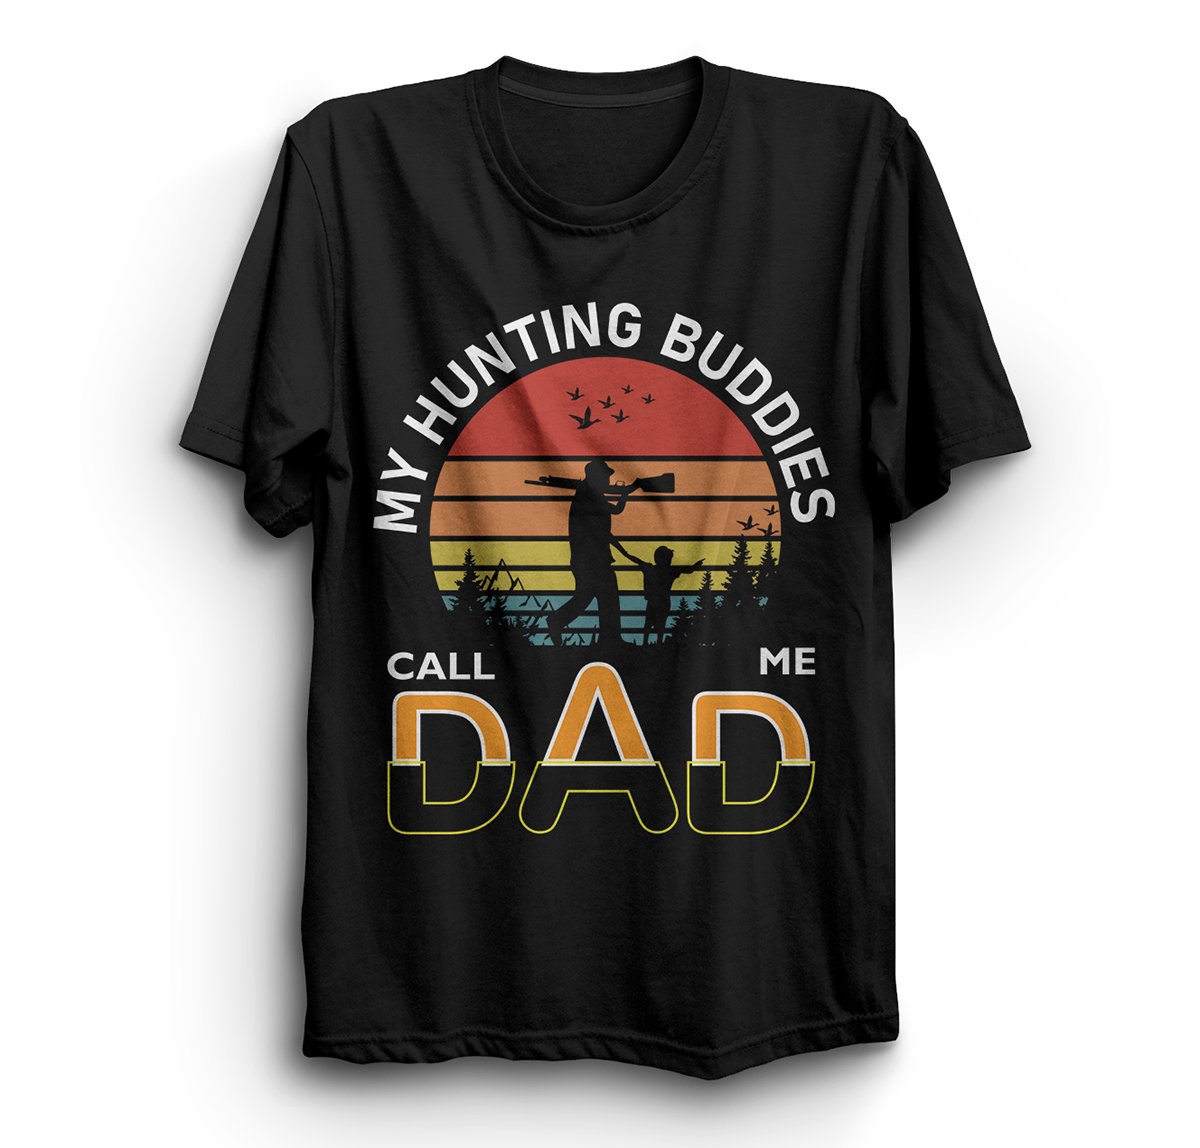 Fathers Day t-shirt typography   Graphic Designer T-Shirt Design t-shirts fatherandson Fathersday T-Shirtdesign